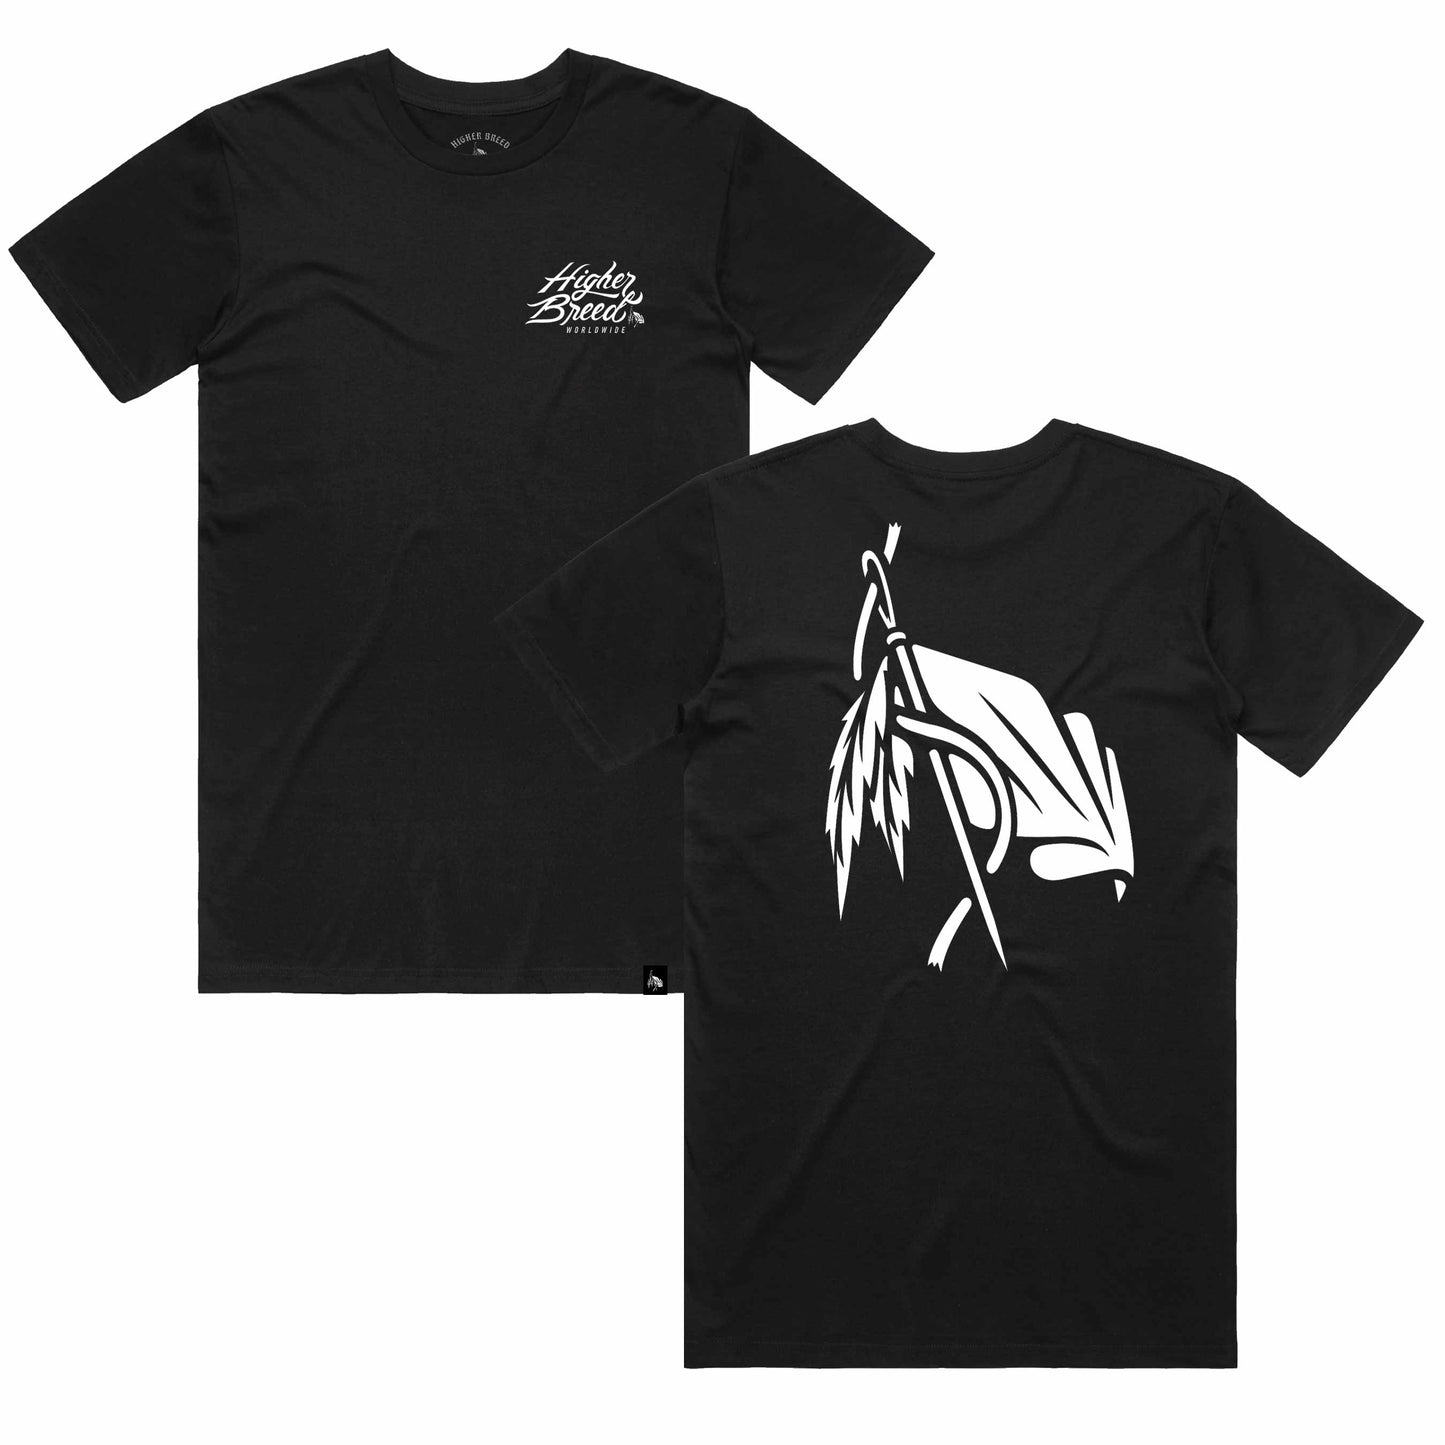 Higher Breed - Icon - T-Shirt (Black)